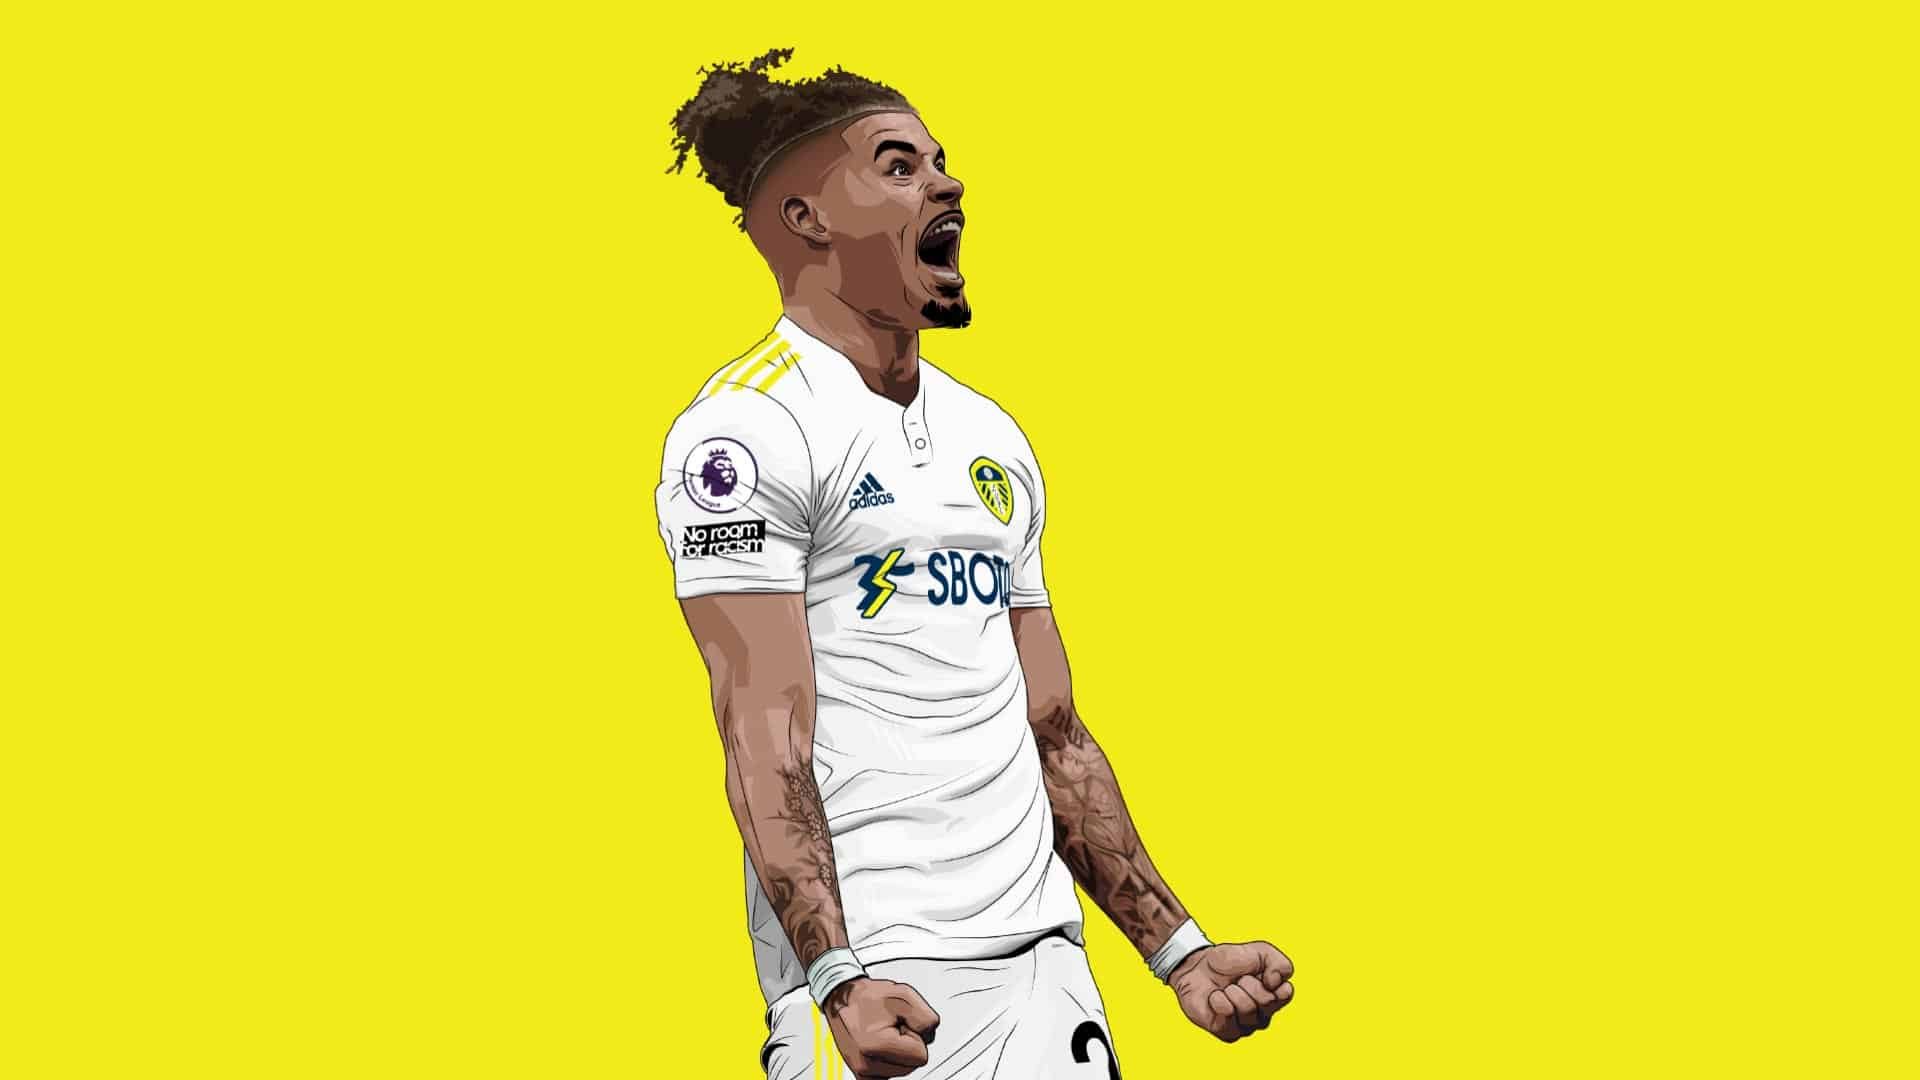 An illustration of Kalvin Phillips celebrating wildly against a yellow background — buy that, Scum!